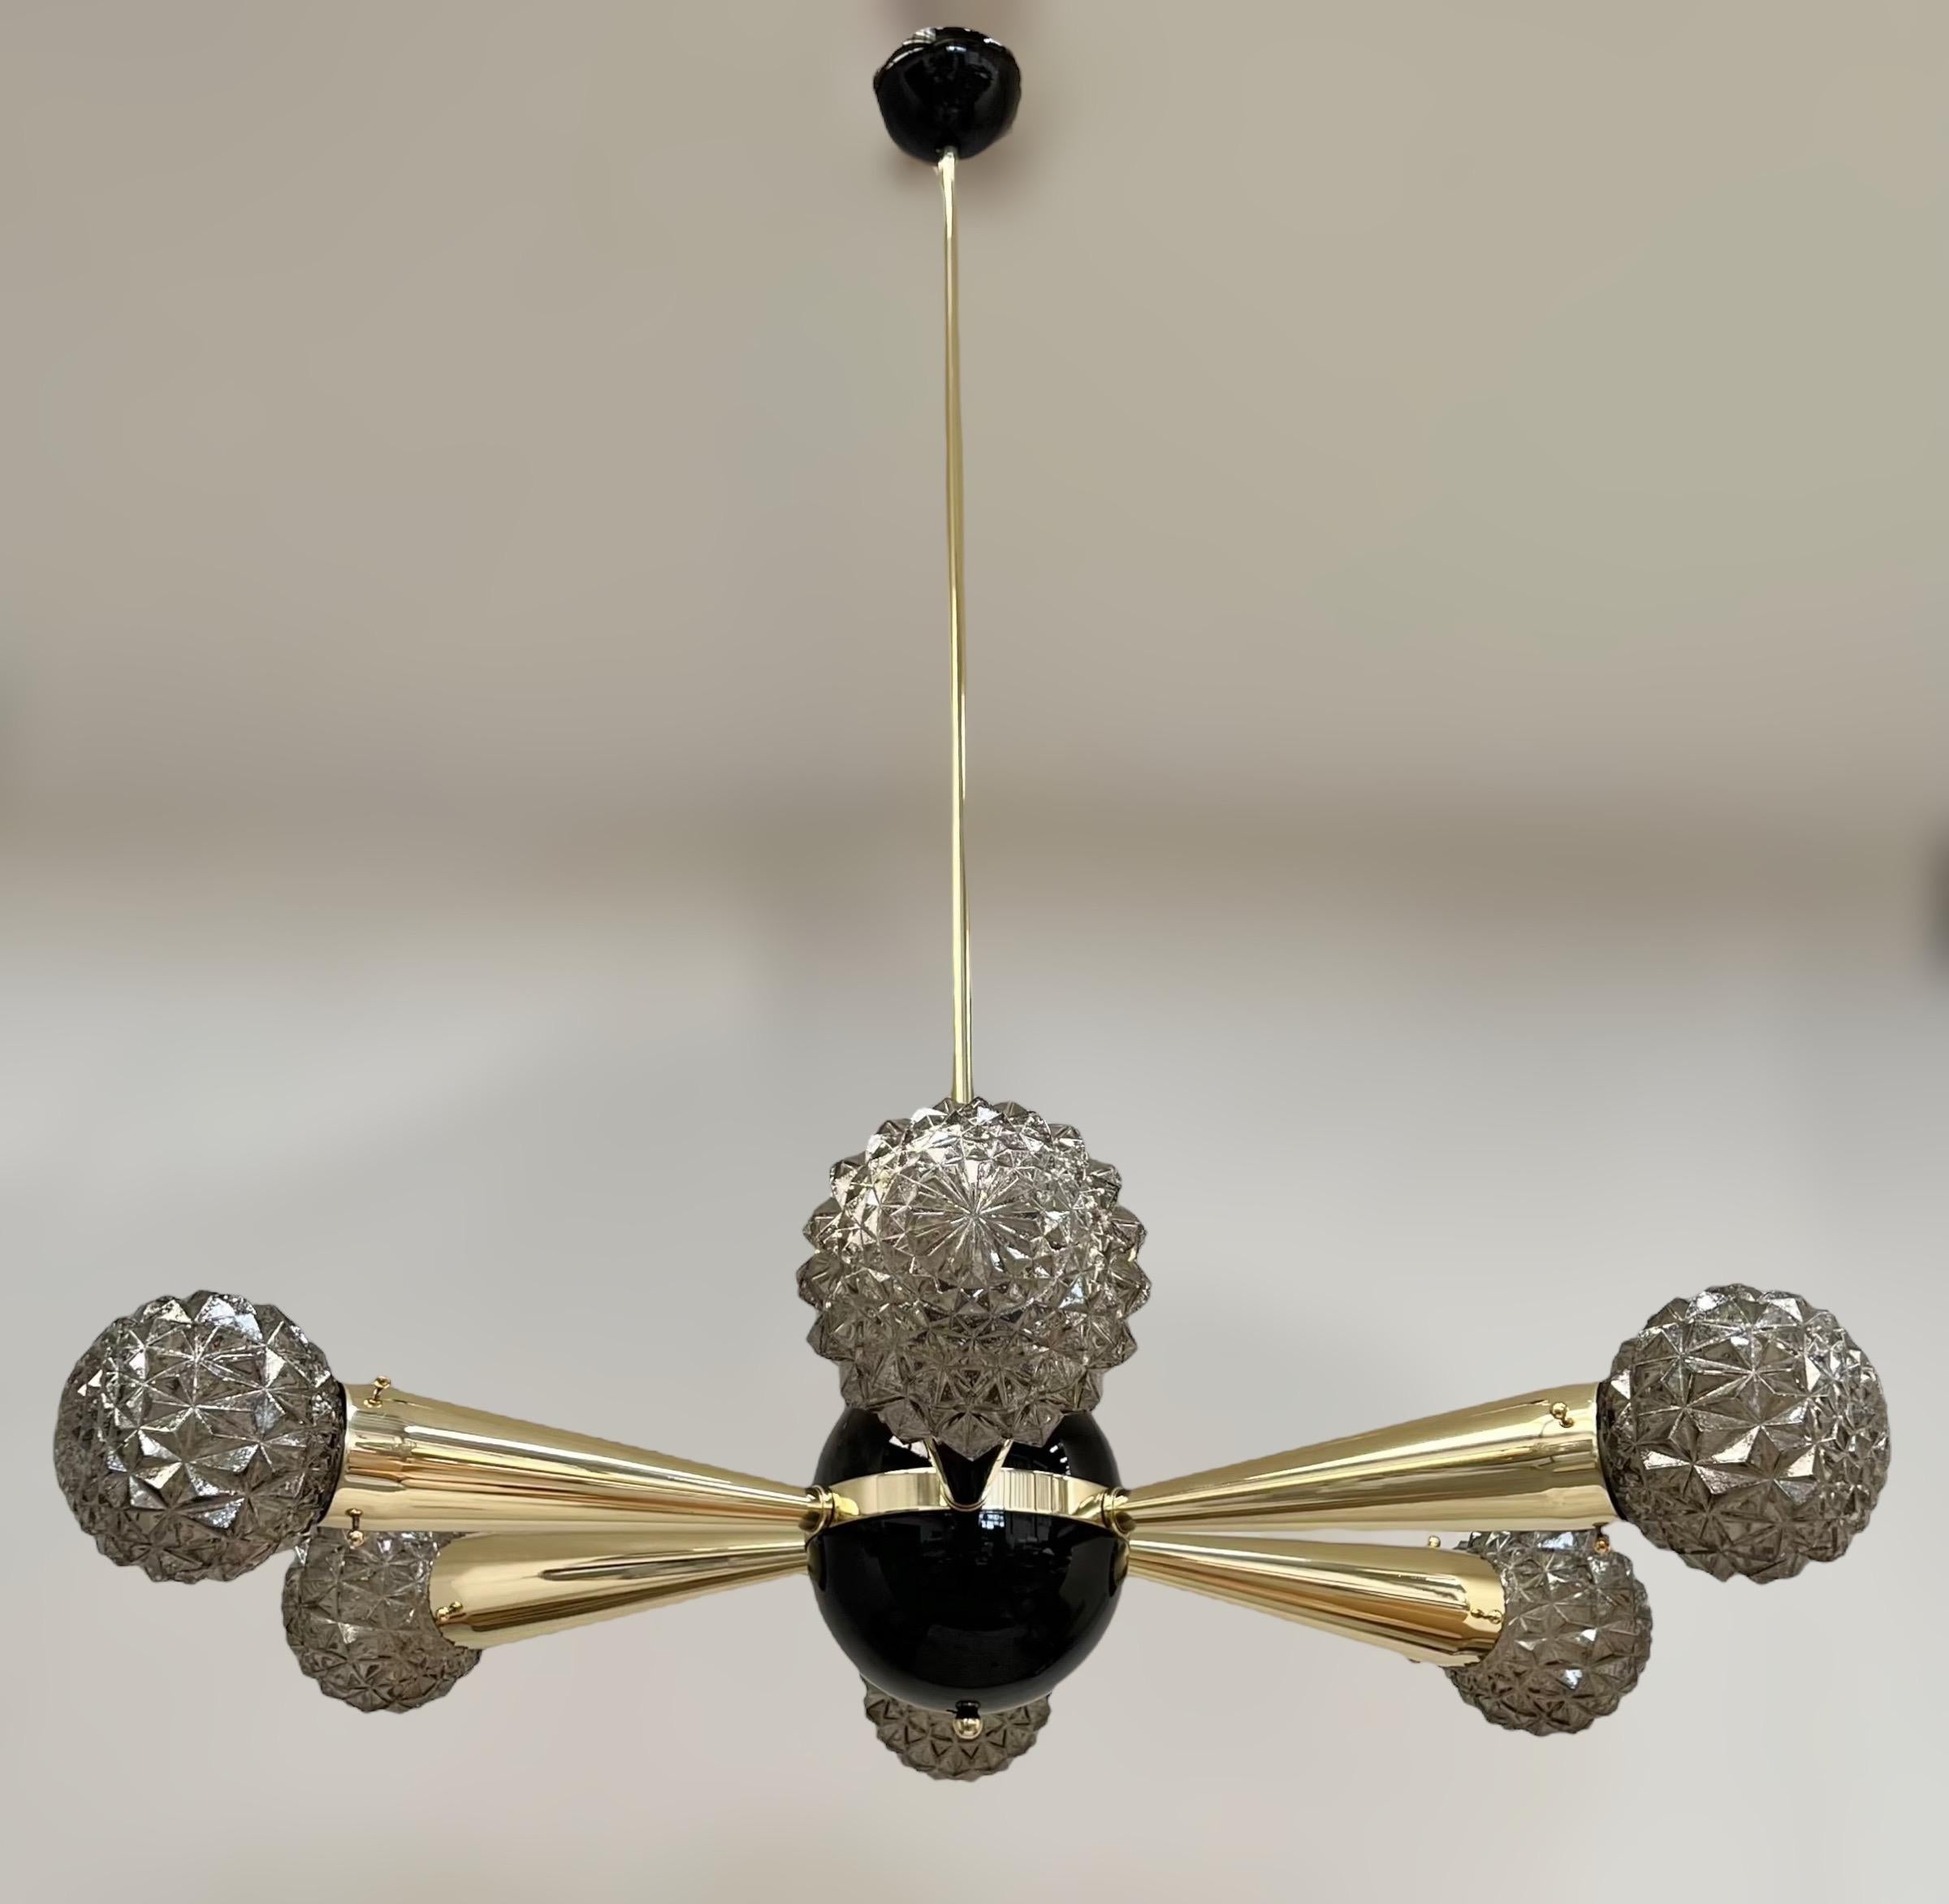 Italian chandelier with smoky faceted Murano glass shades, mounted on polished brass frame with black enameled center and ceiling canopy / Designed by Fabio Bergomi for Fabio Ltd / Made in Italy
6 lights / E12 or E14 type / max 40W each
Measures: